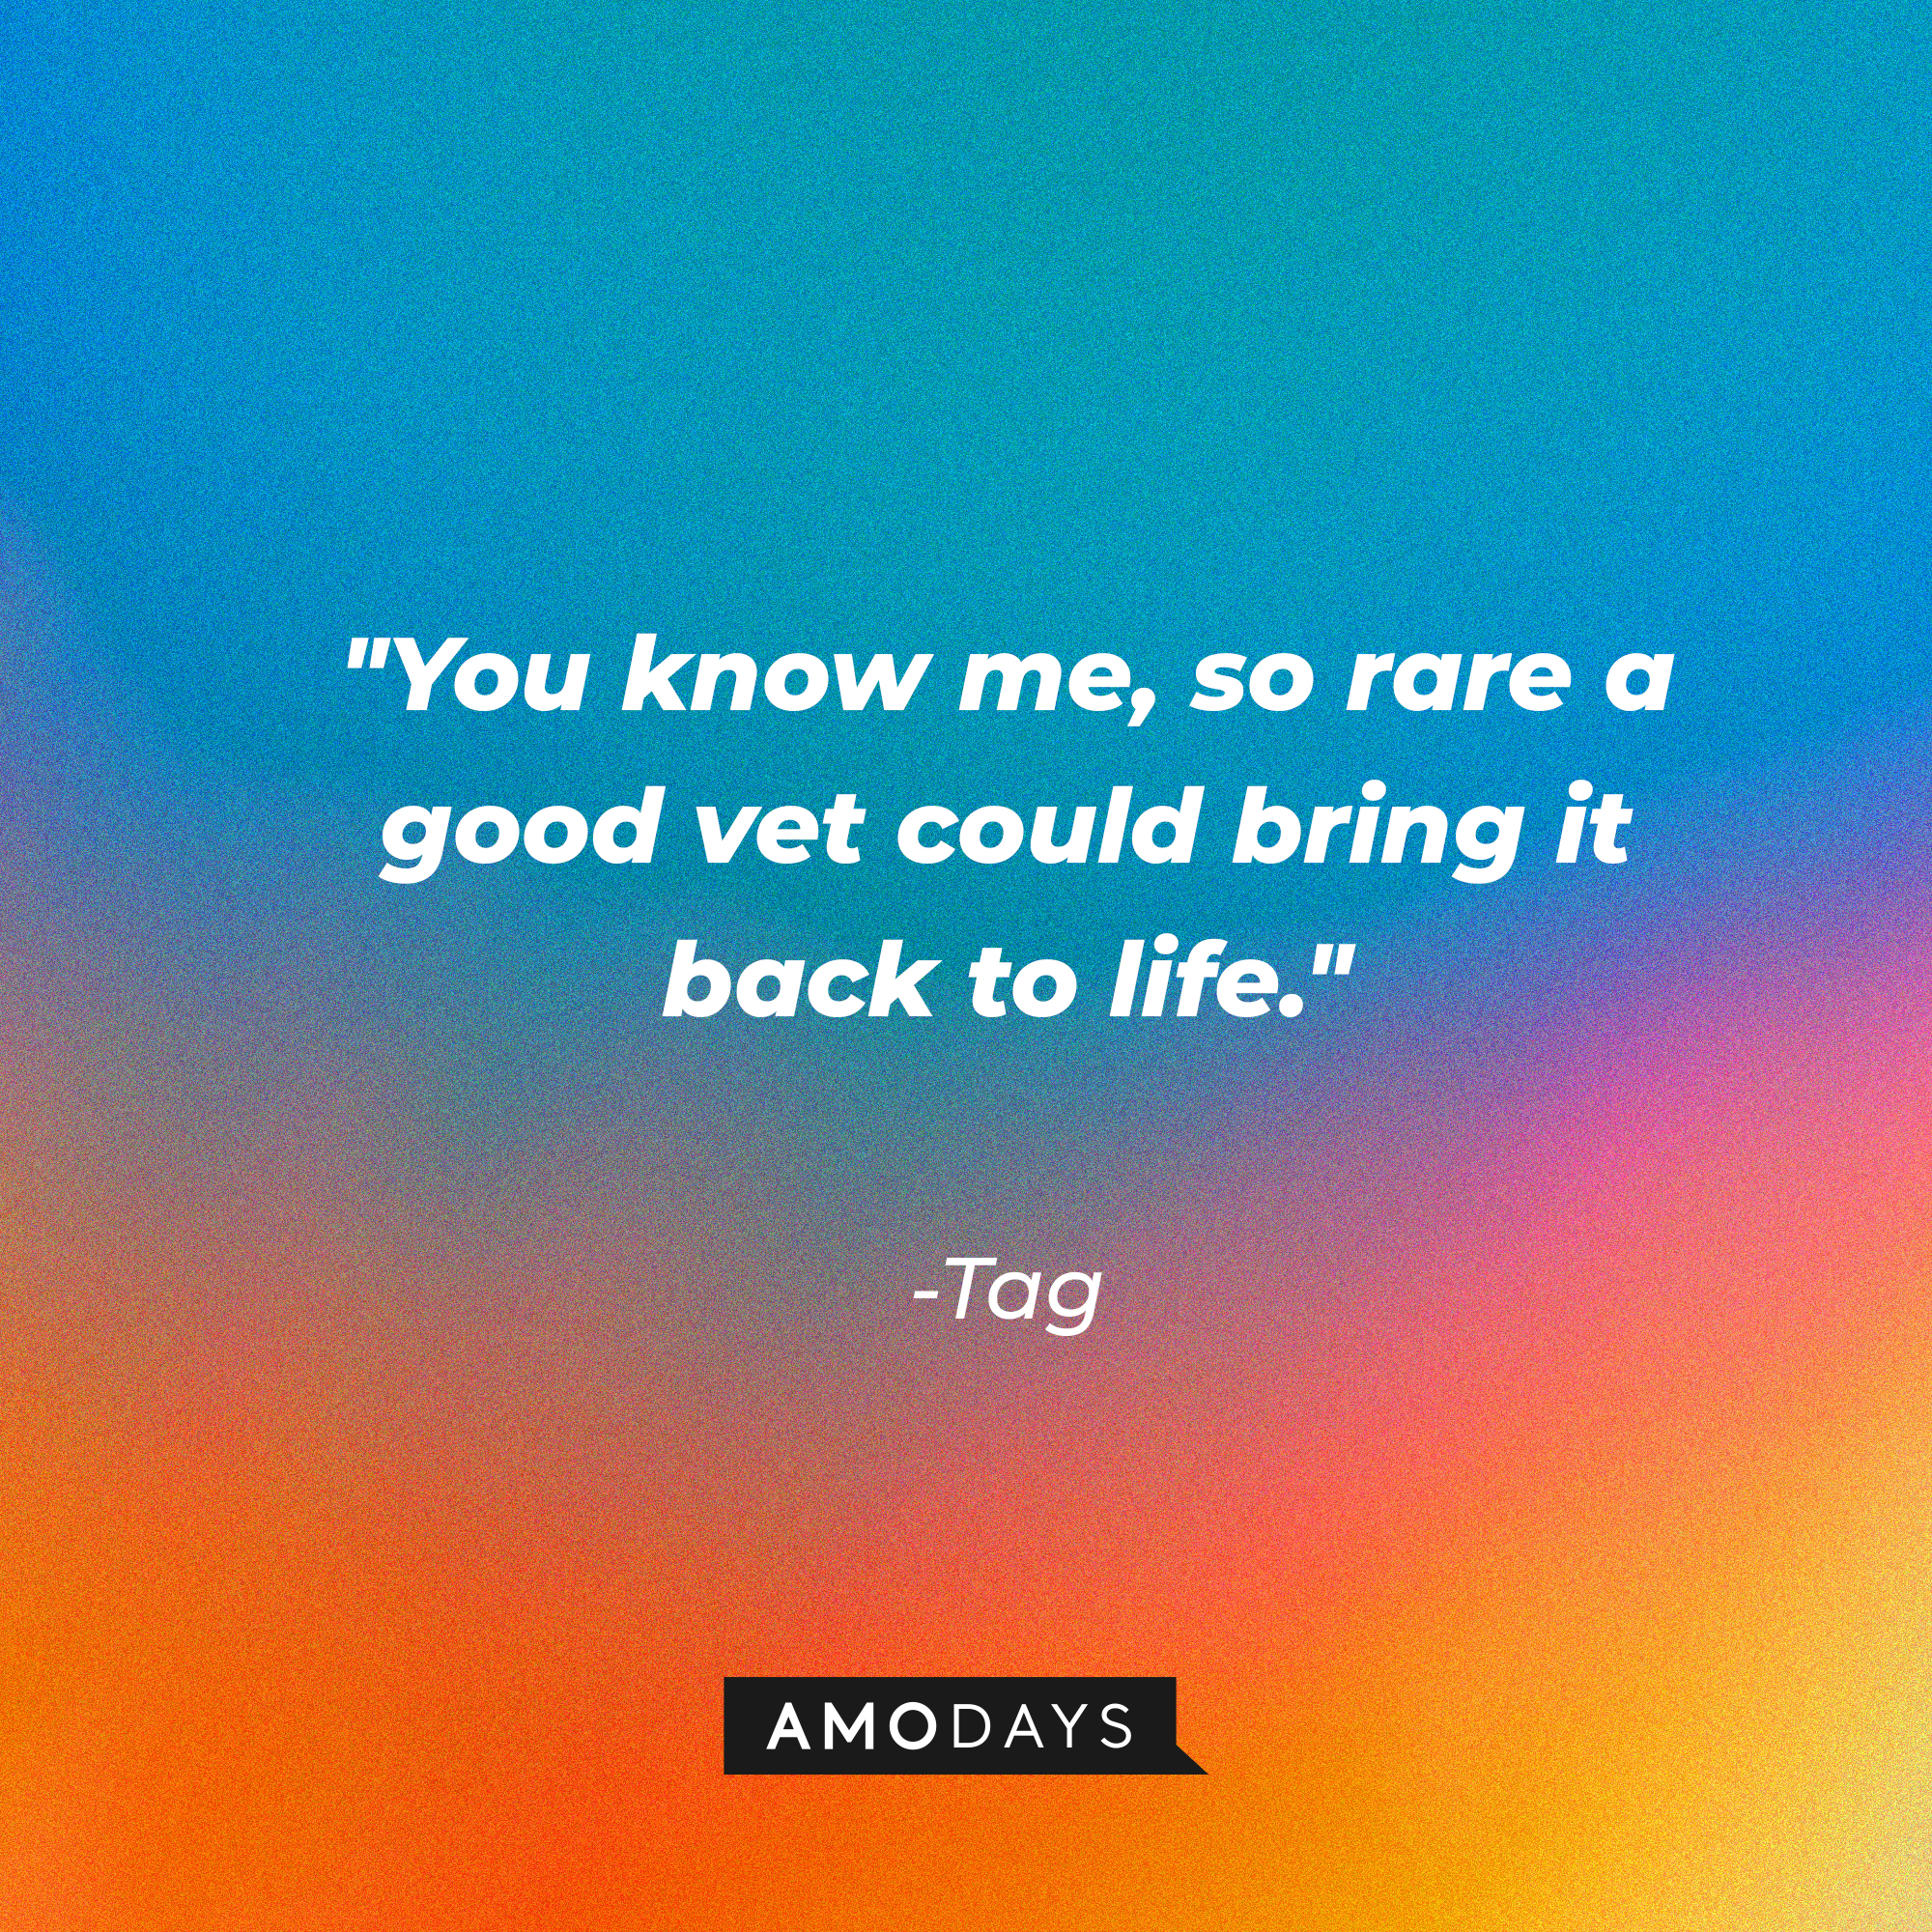 Tag's quote: "You know me, so rare a good vet could bring it back to life." | Source: AmoDays